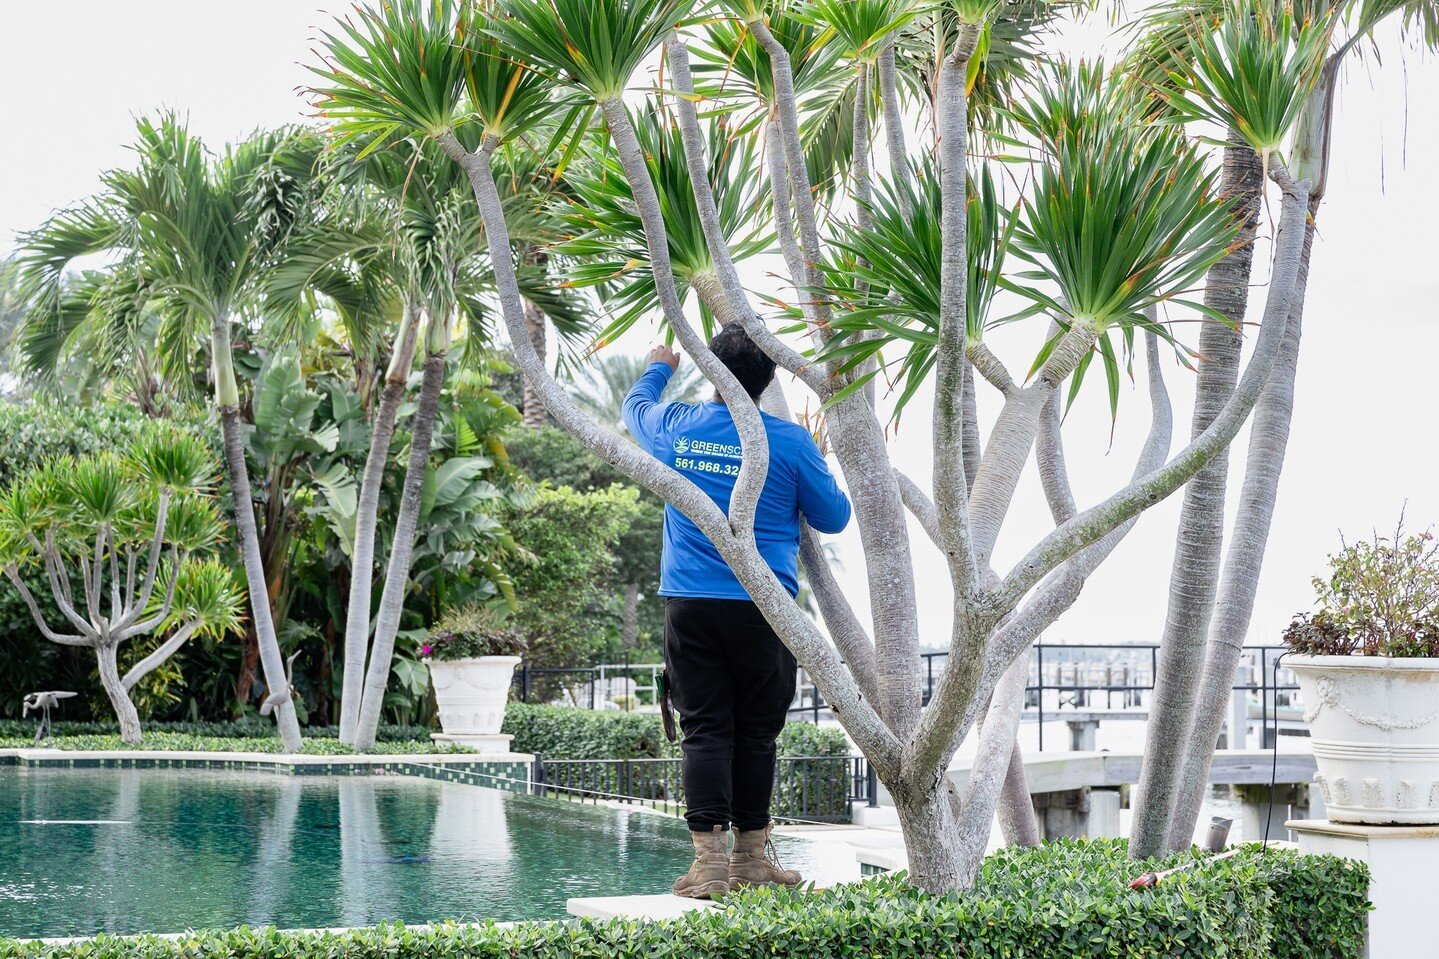 Ensuring perfection isn't an easy task. The team at Greenscape Design go to great lengths to make sure your landscaping looks top notch. 
.
.
.
📸 @greenscapedesign_inc
👉 Have Branding/Commercial photography needs? Let's connect and see how I can he